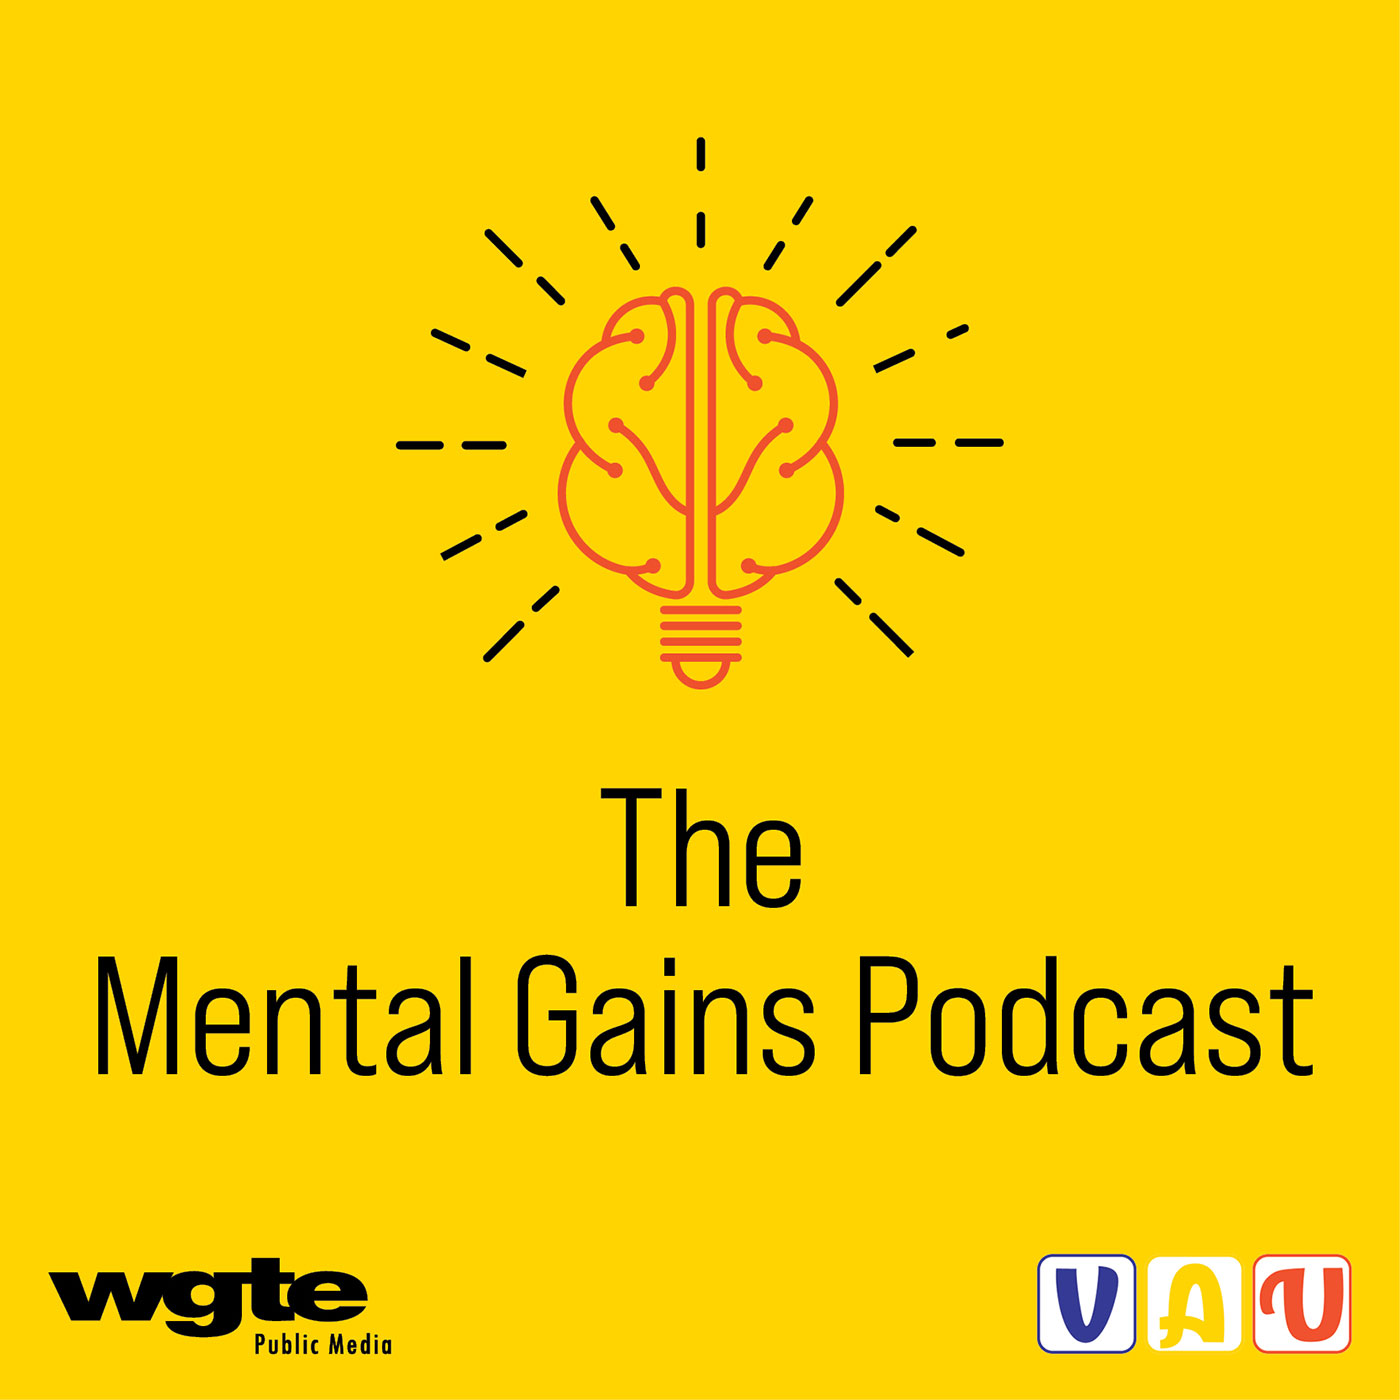 The Mental Gains Podcast